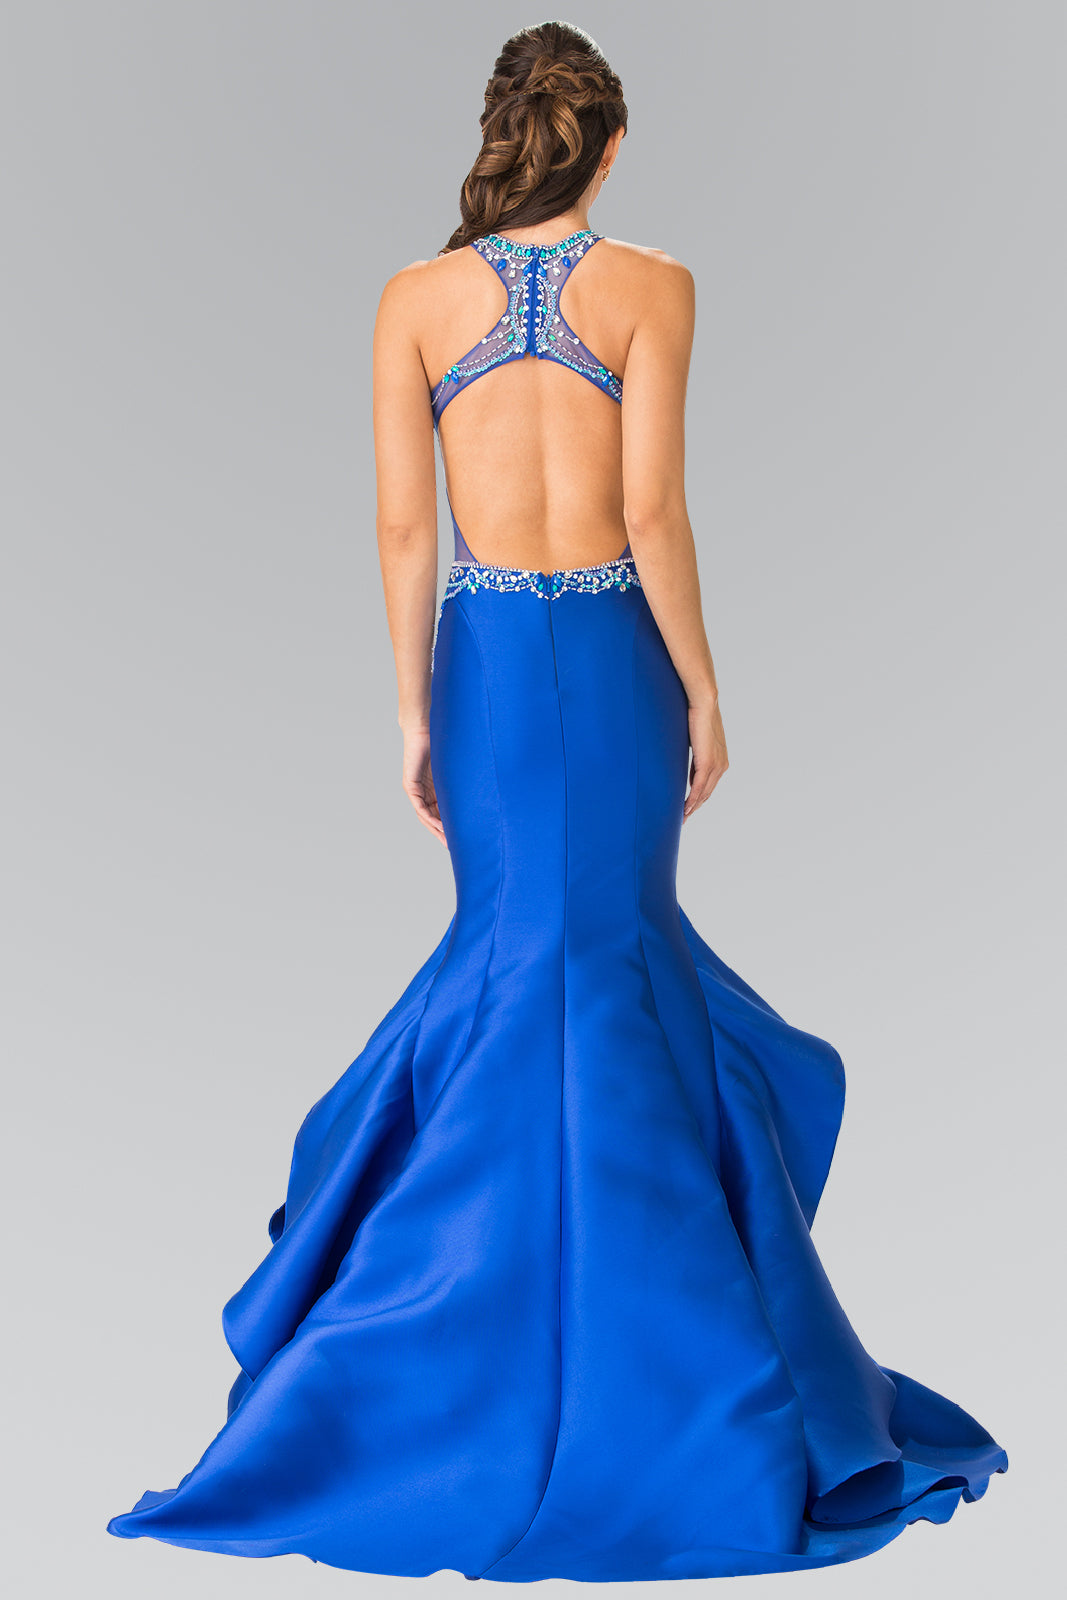 Beads Embellished Mermaid Long Dress with Cut-Out Back-smcdress